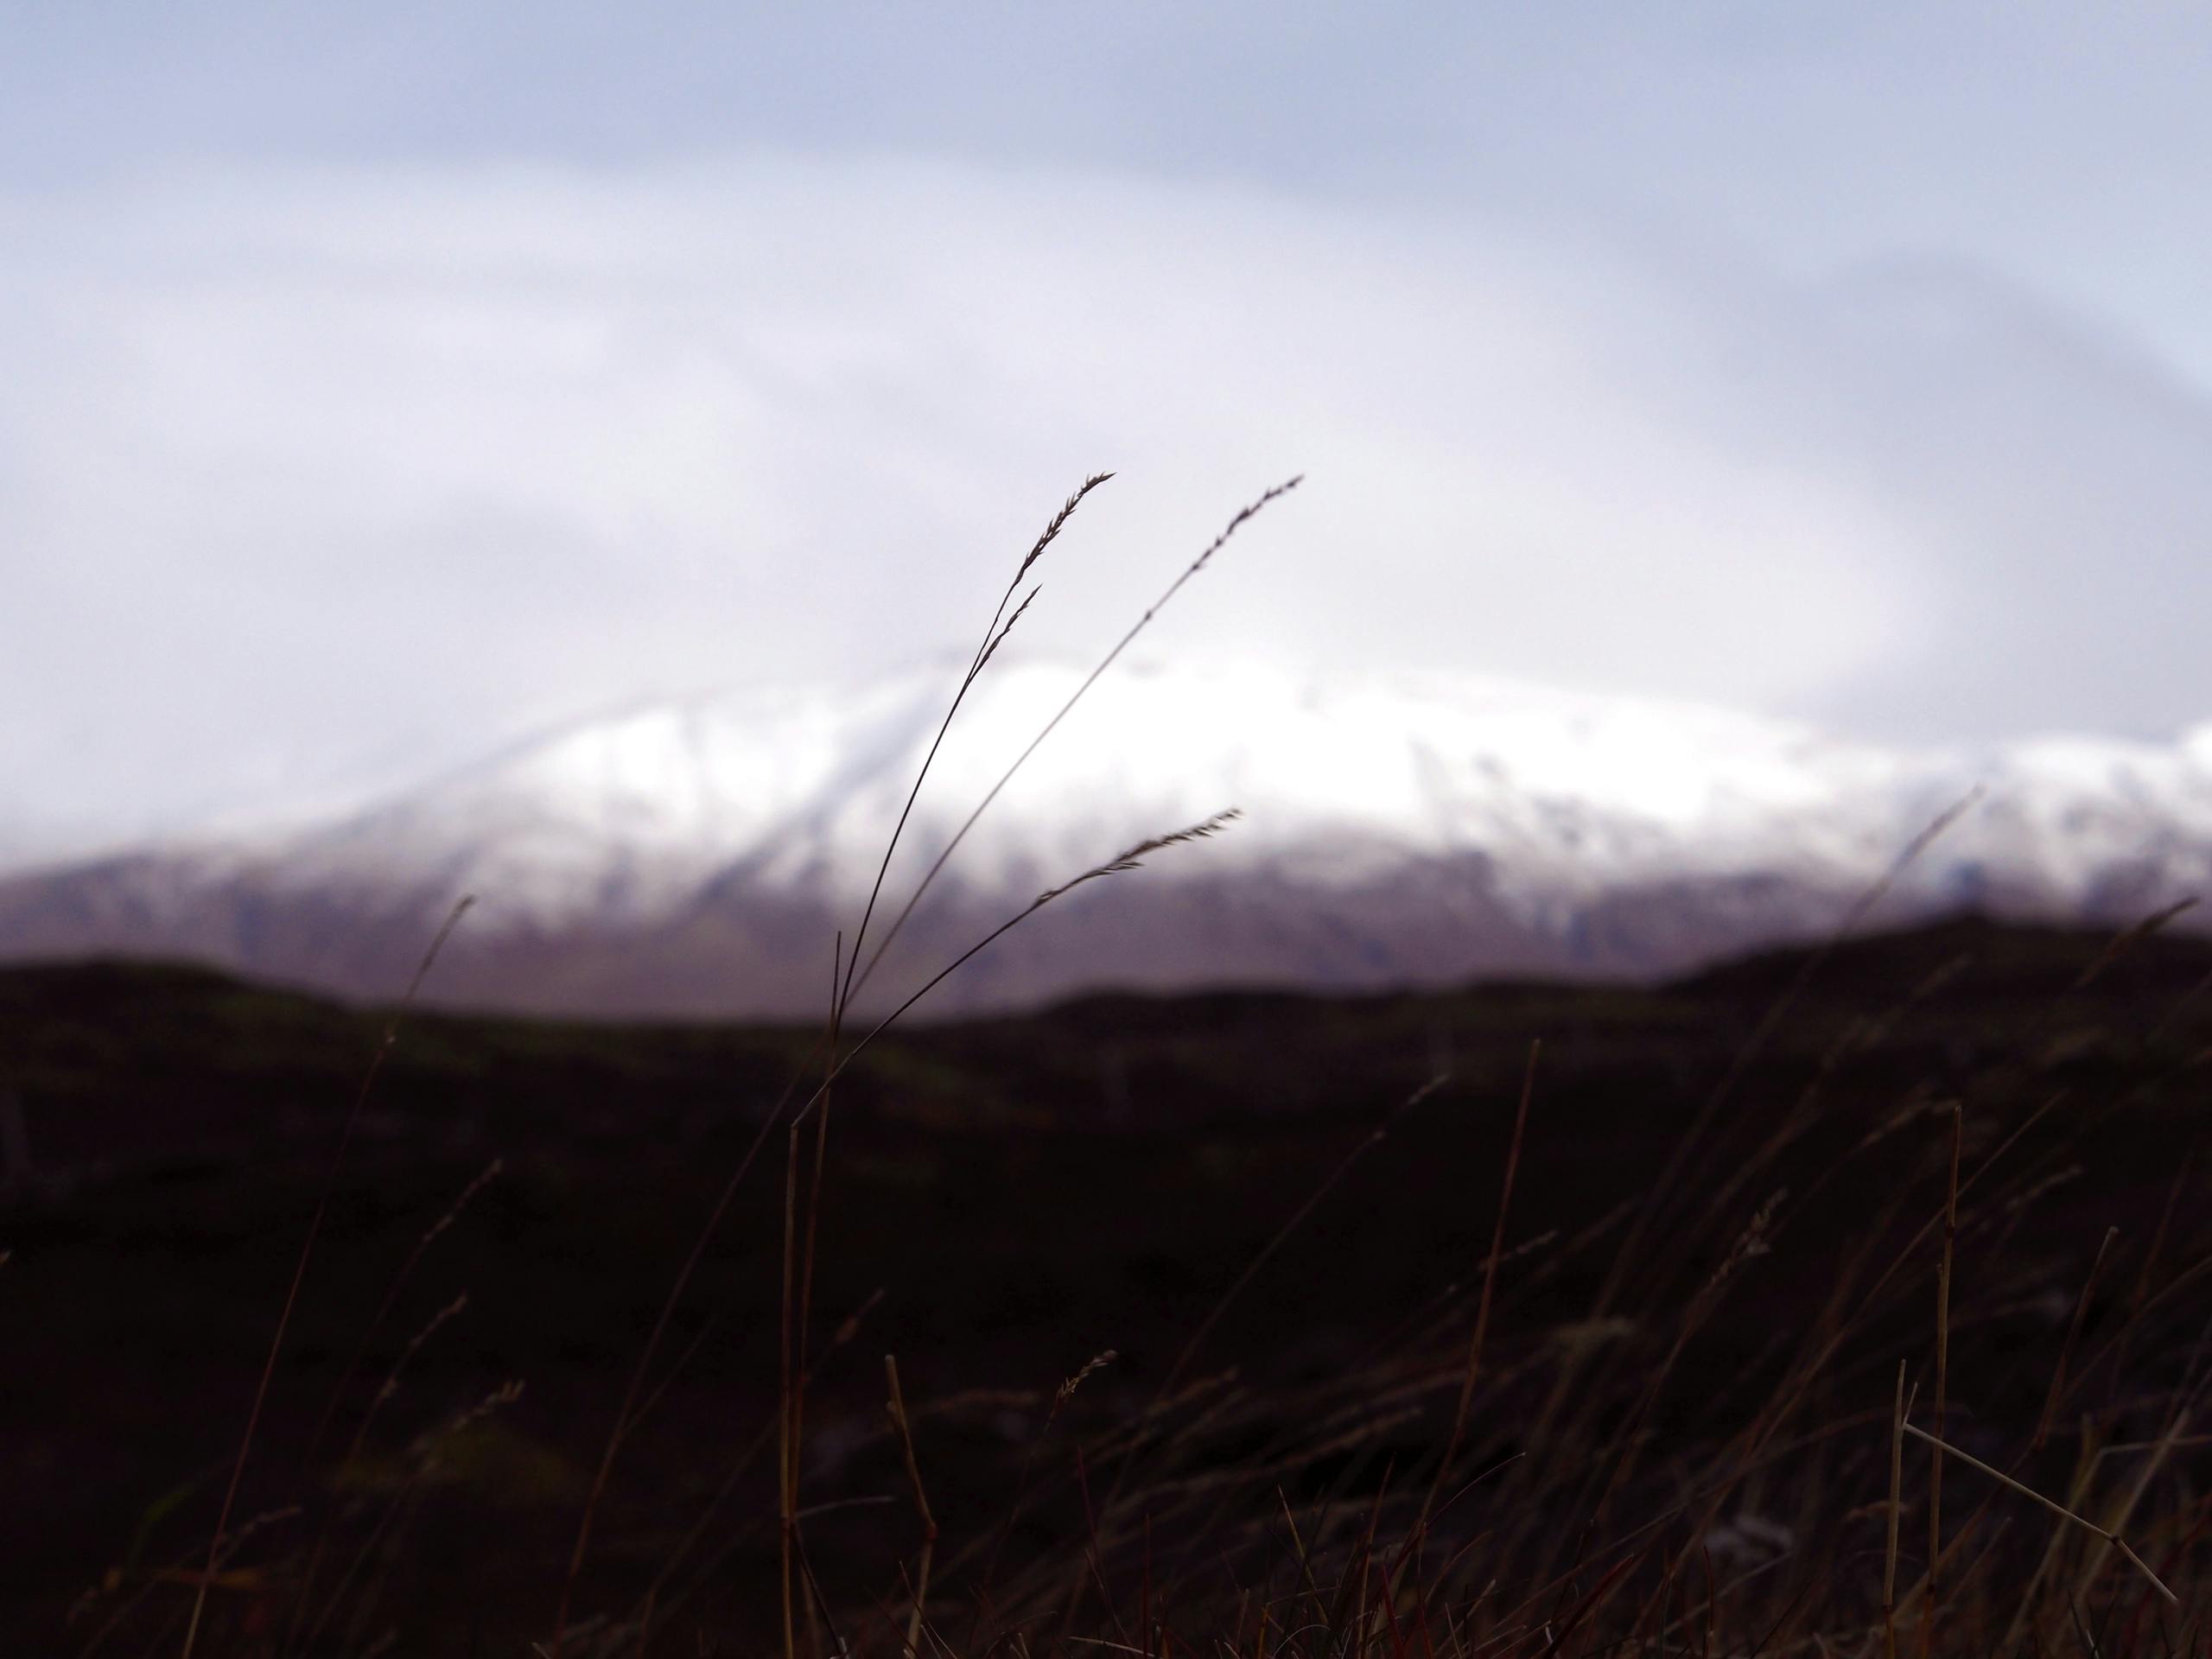 Free stock photo of blade of grass, blurred background, snow capped mountain